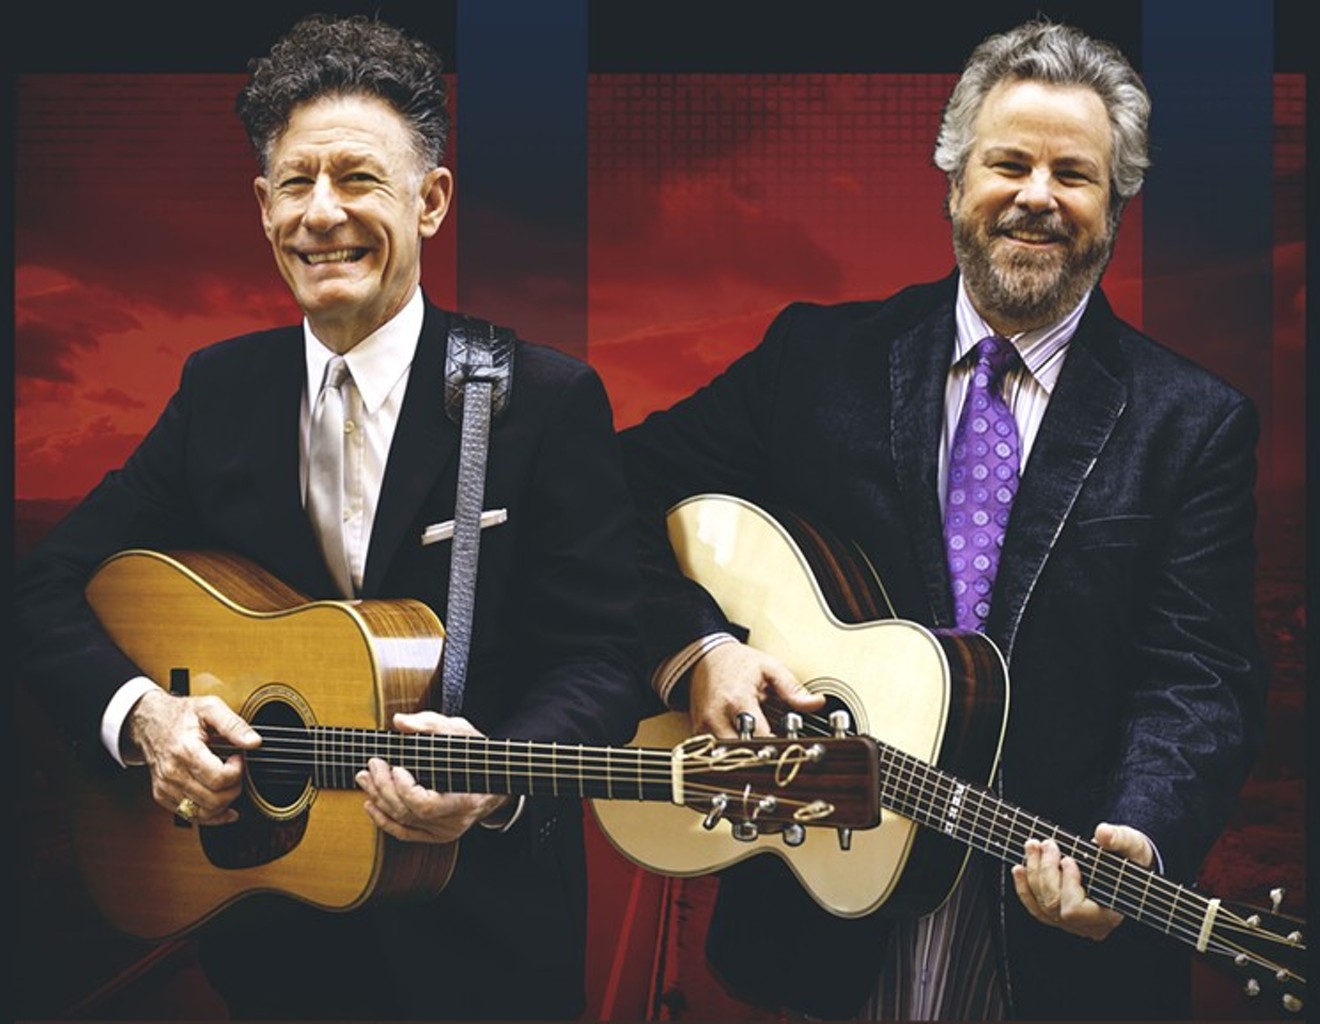 Lyle Lovett and Robert Earl Keen will be along for the crescendo ending with George Strait.